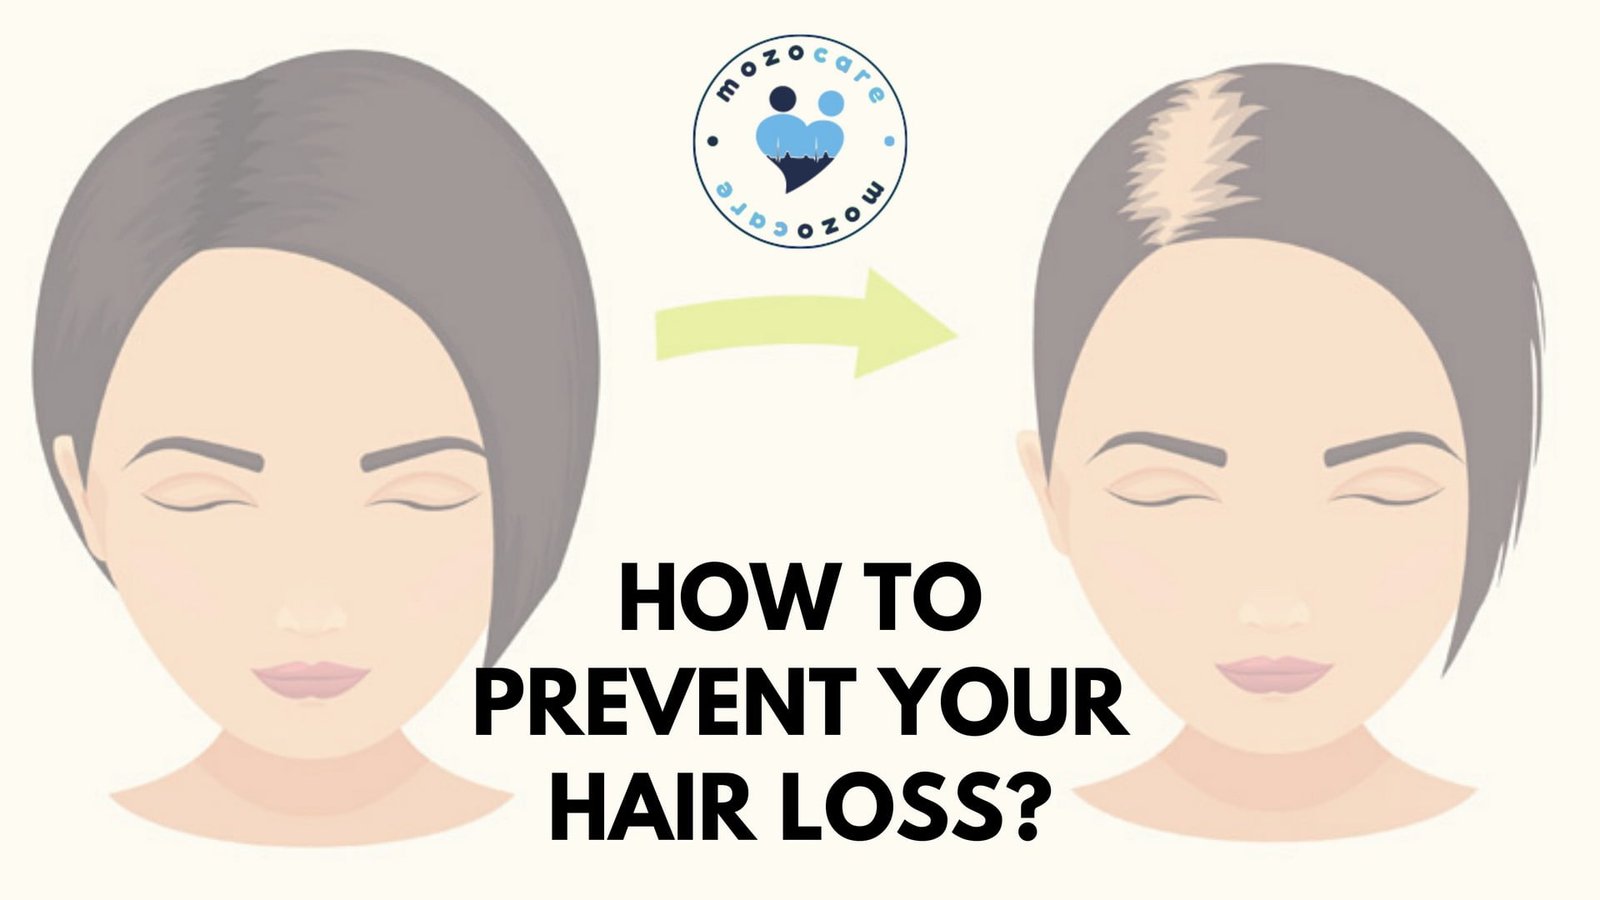 How To Prevent Your Hair Loss